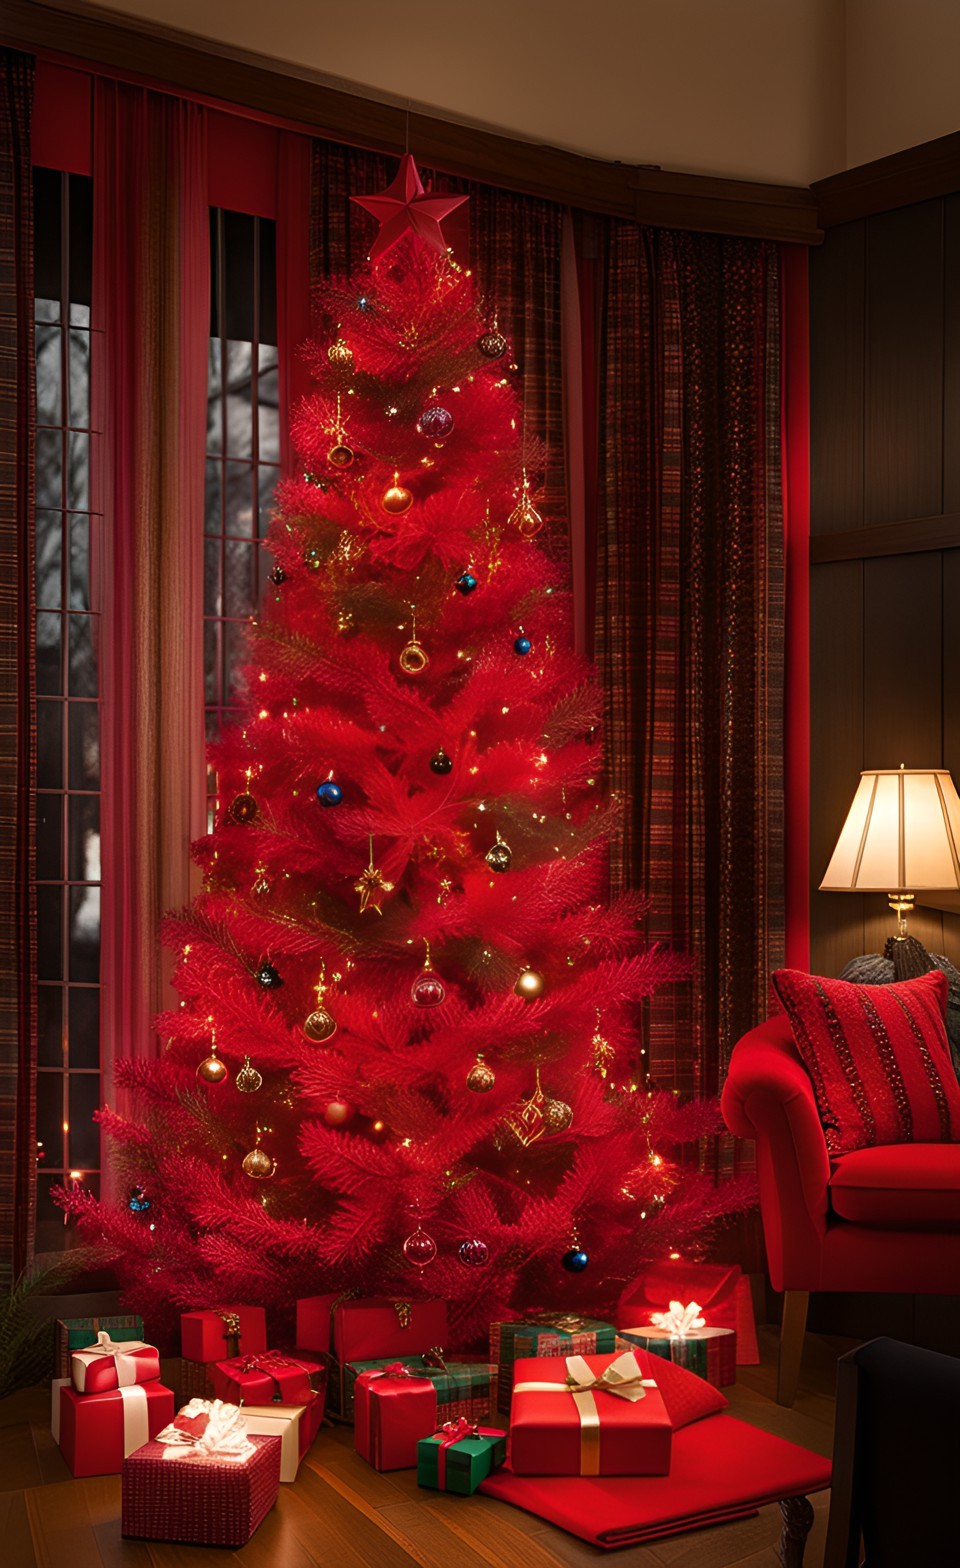 13 of the Best Red Christmas Tree Ideas